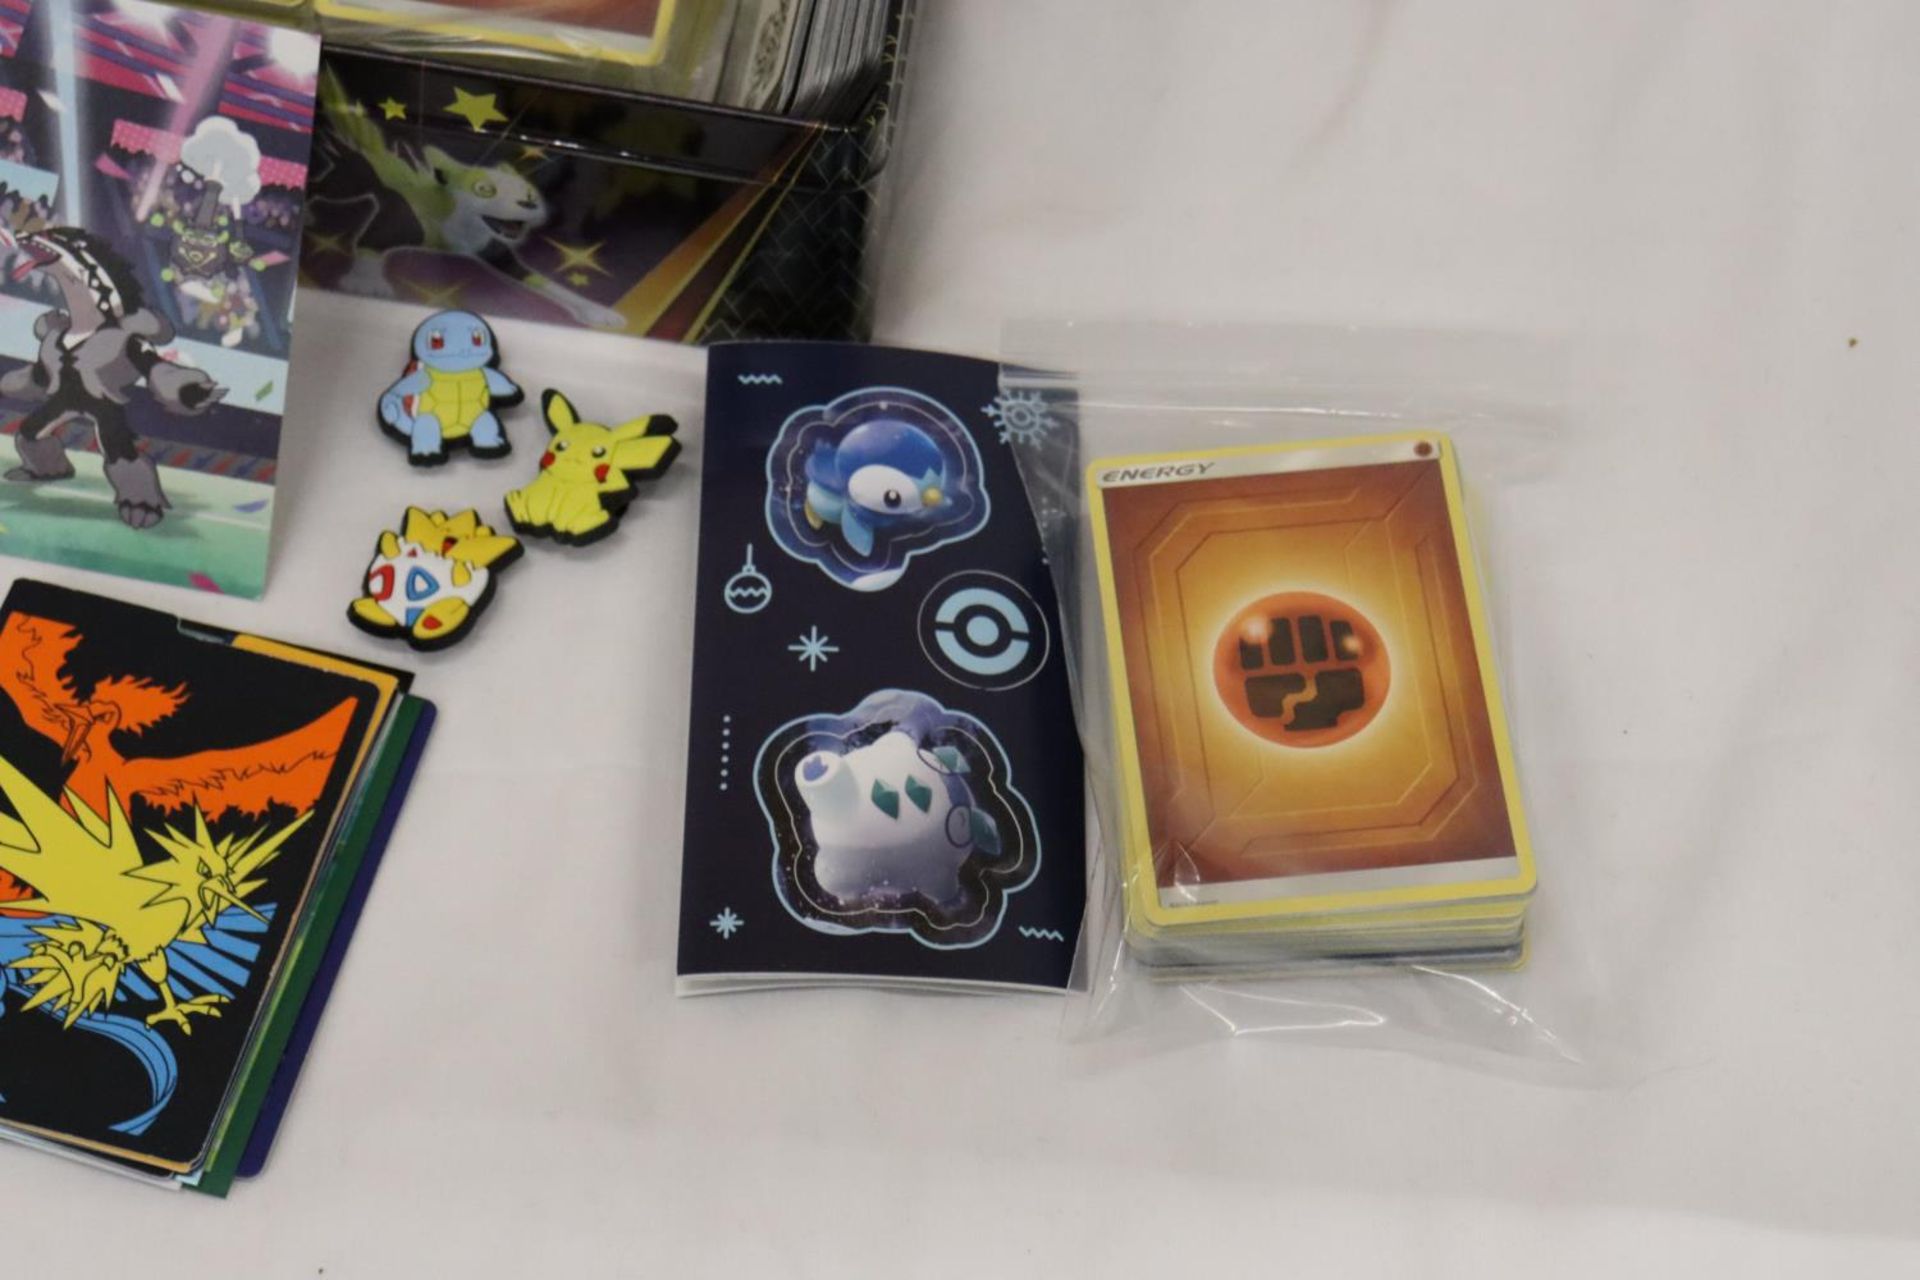 A POKEMON COLLECTORS TIN FULL OF CARDS, DIVIDERS AND EXTRAS - Image 5 of 6